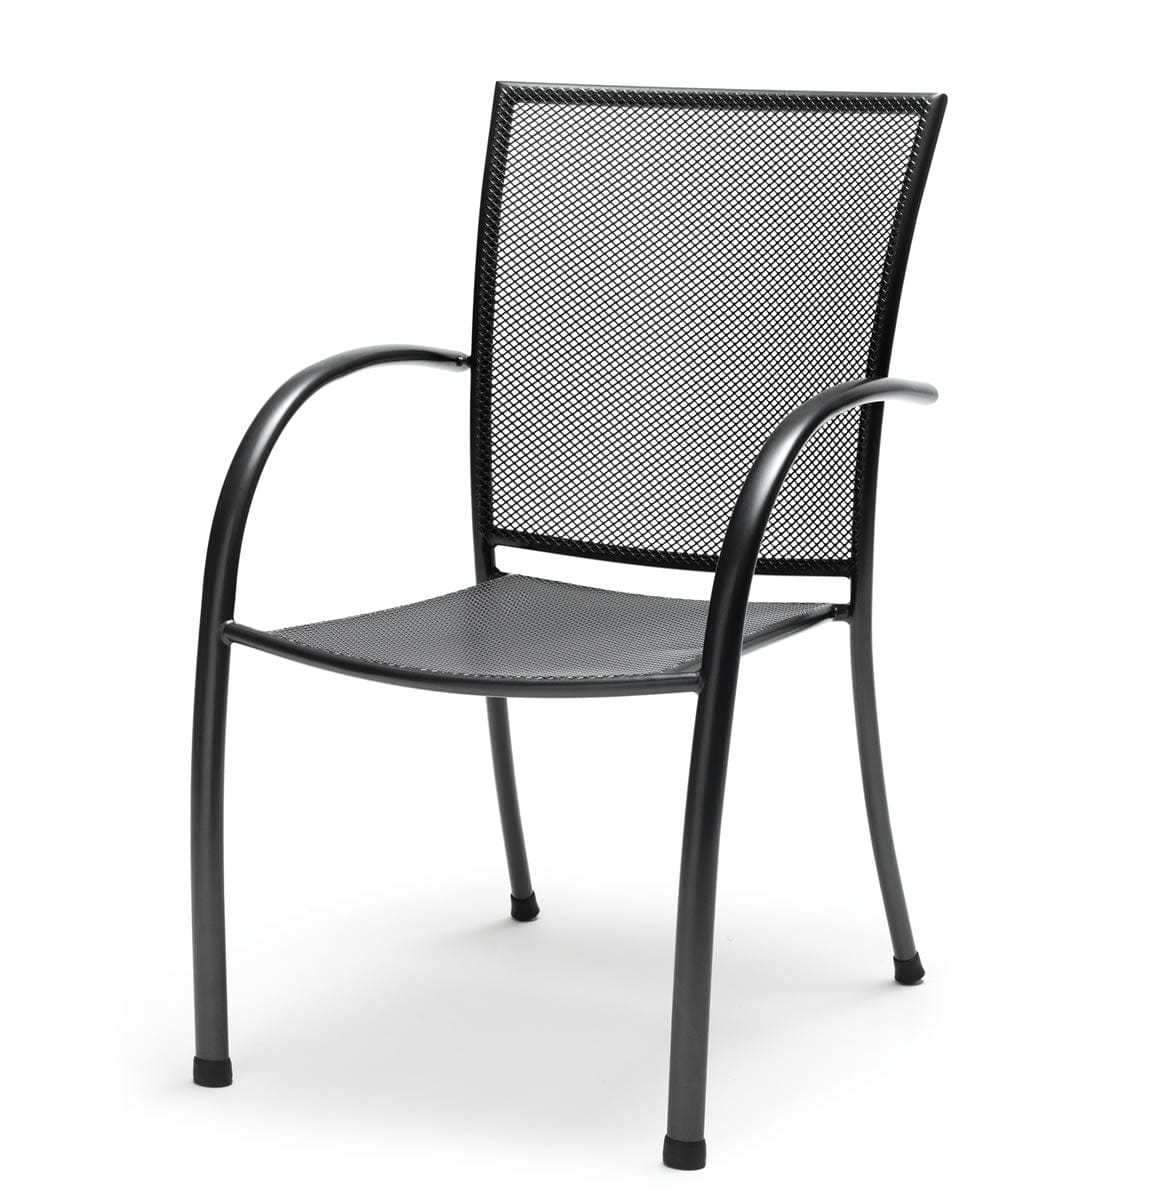 Pilano stackable outdoor dining chair